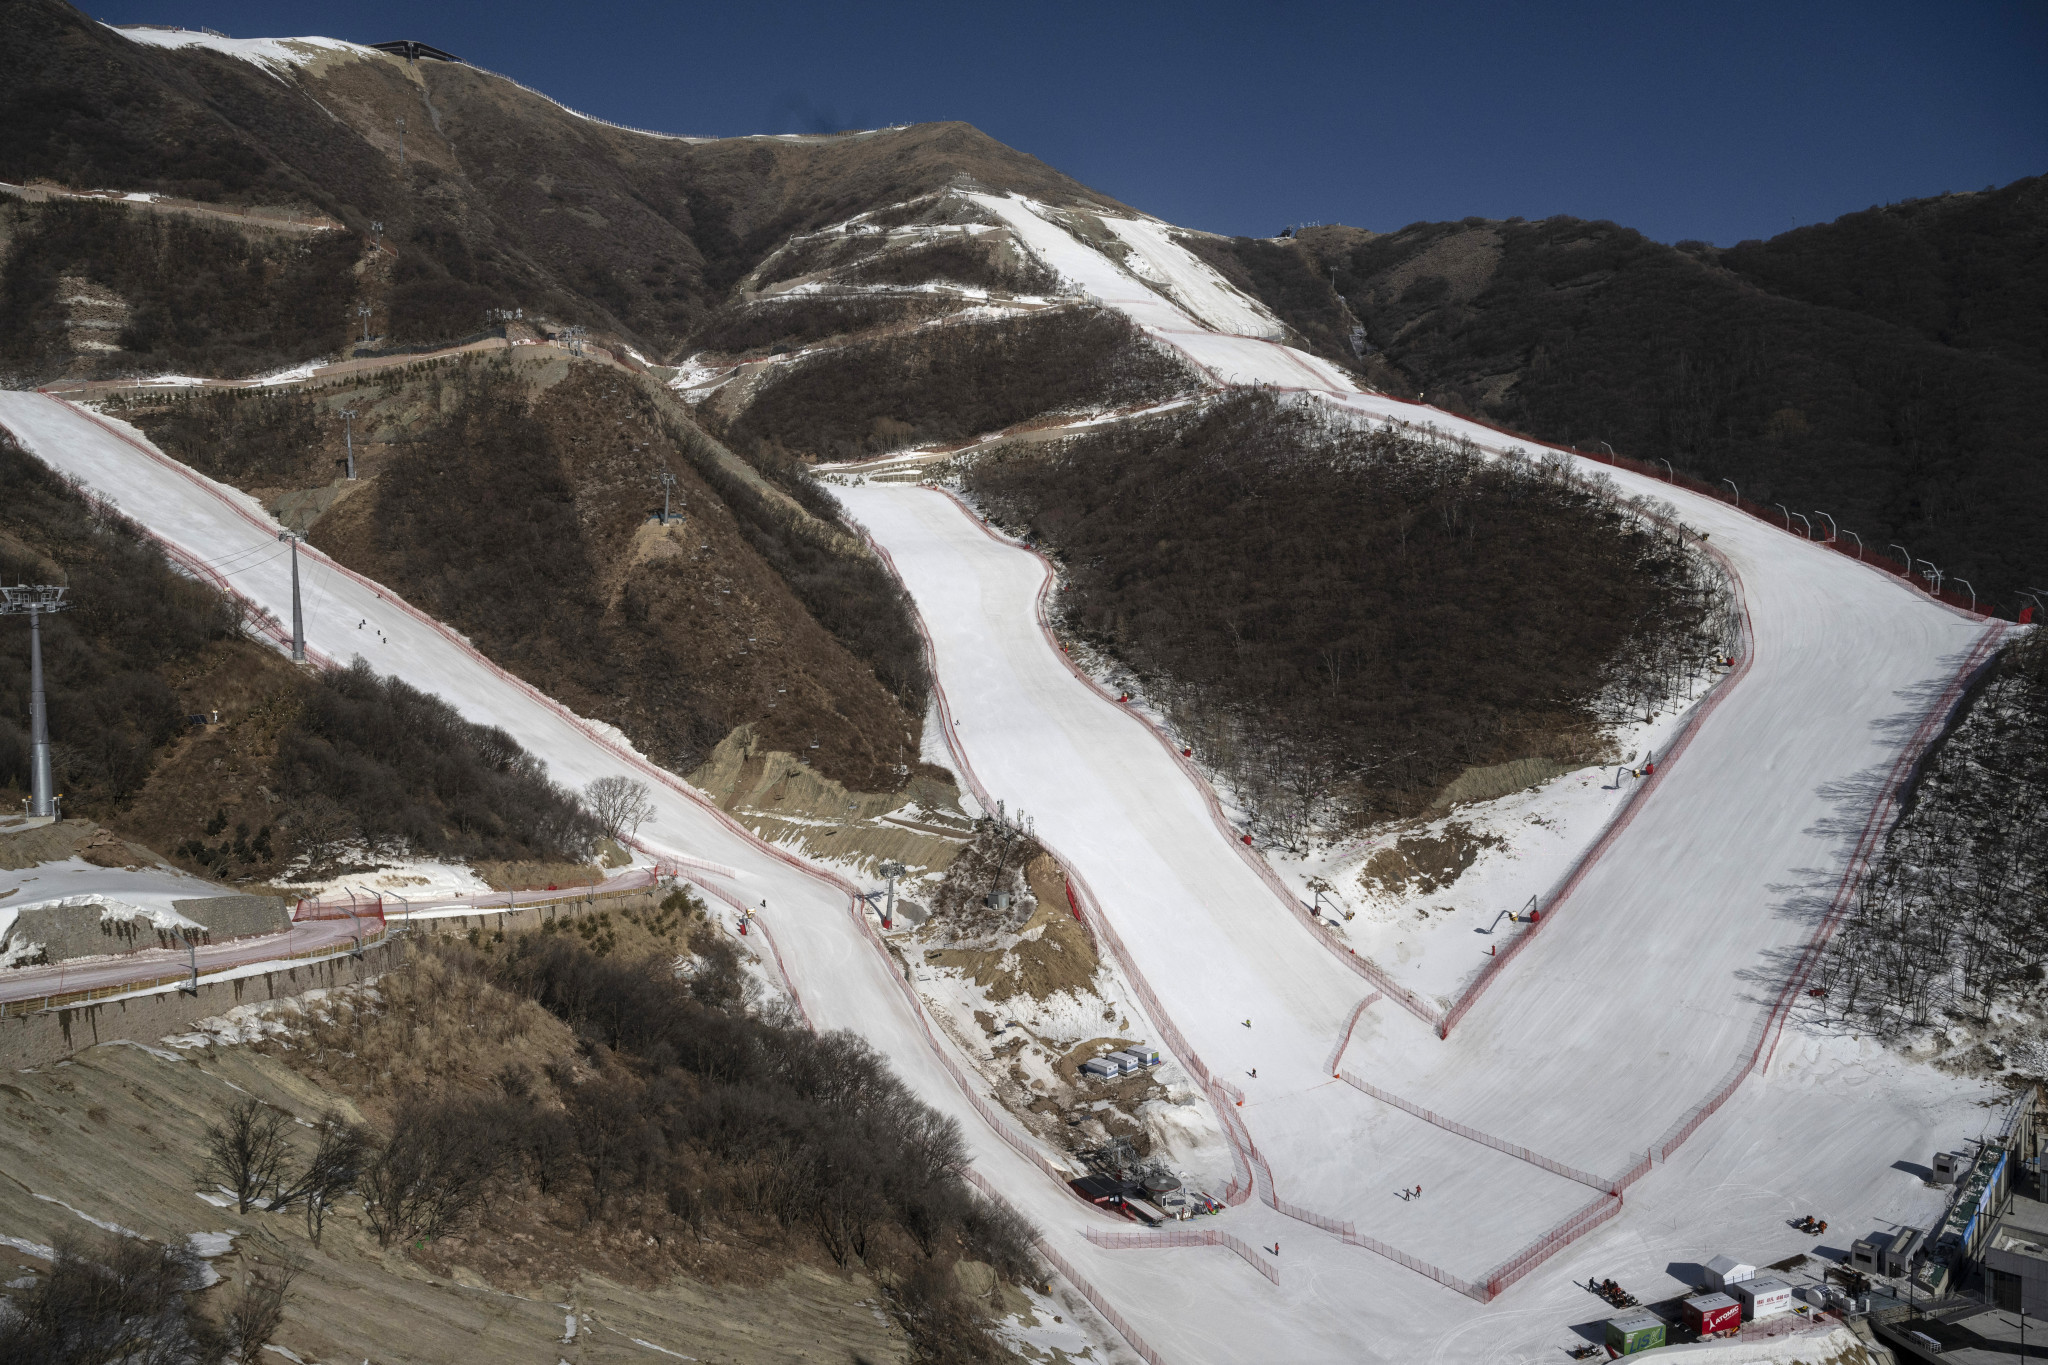 Beijing 2022 says snowmaking process underway at Alpine venue for Winter Olympics